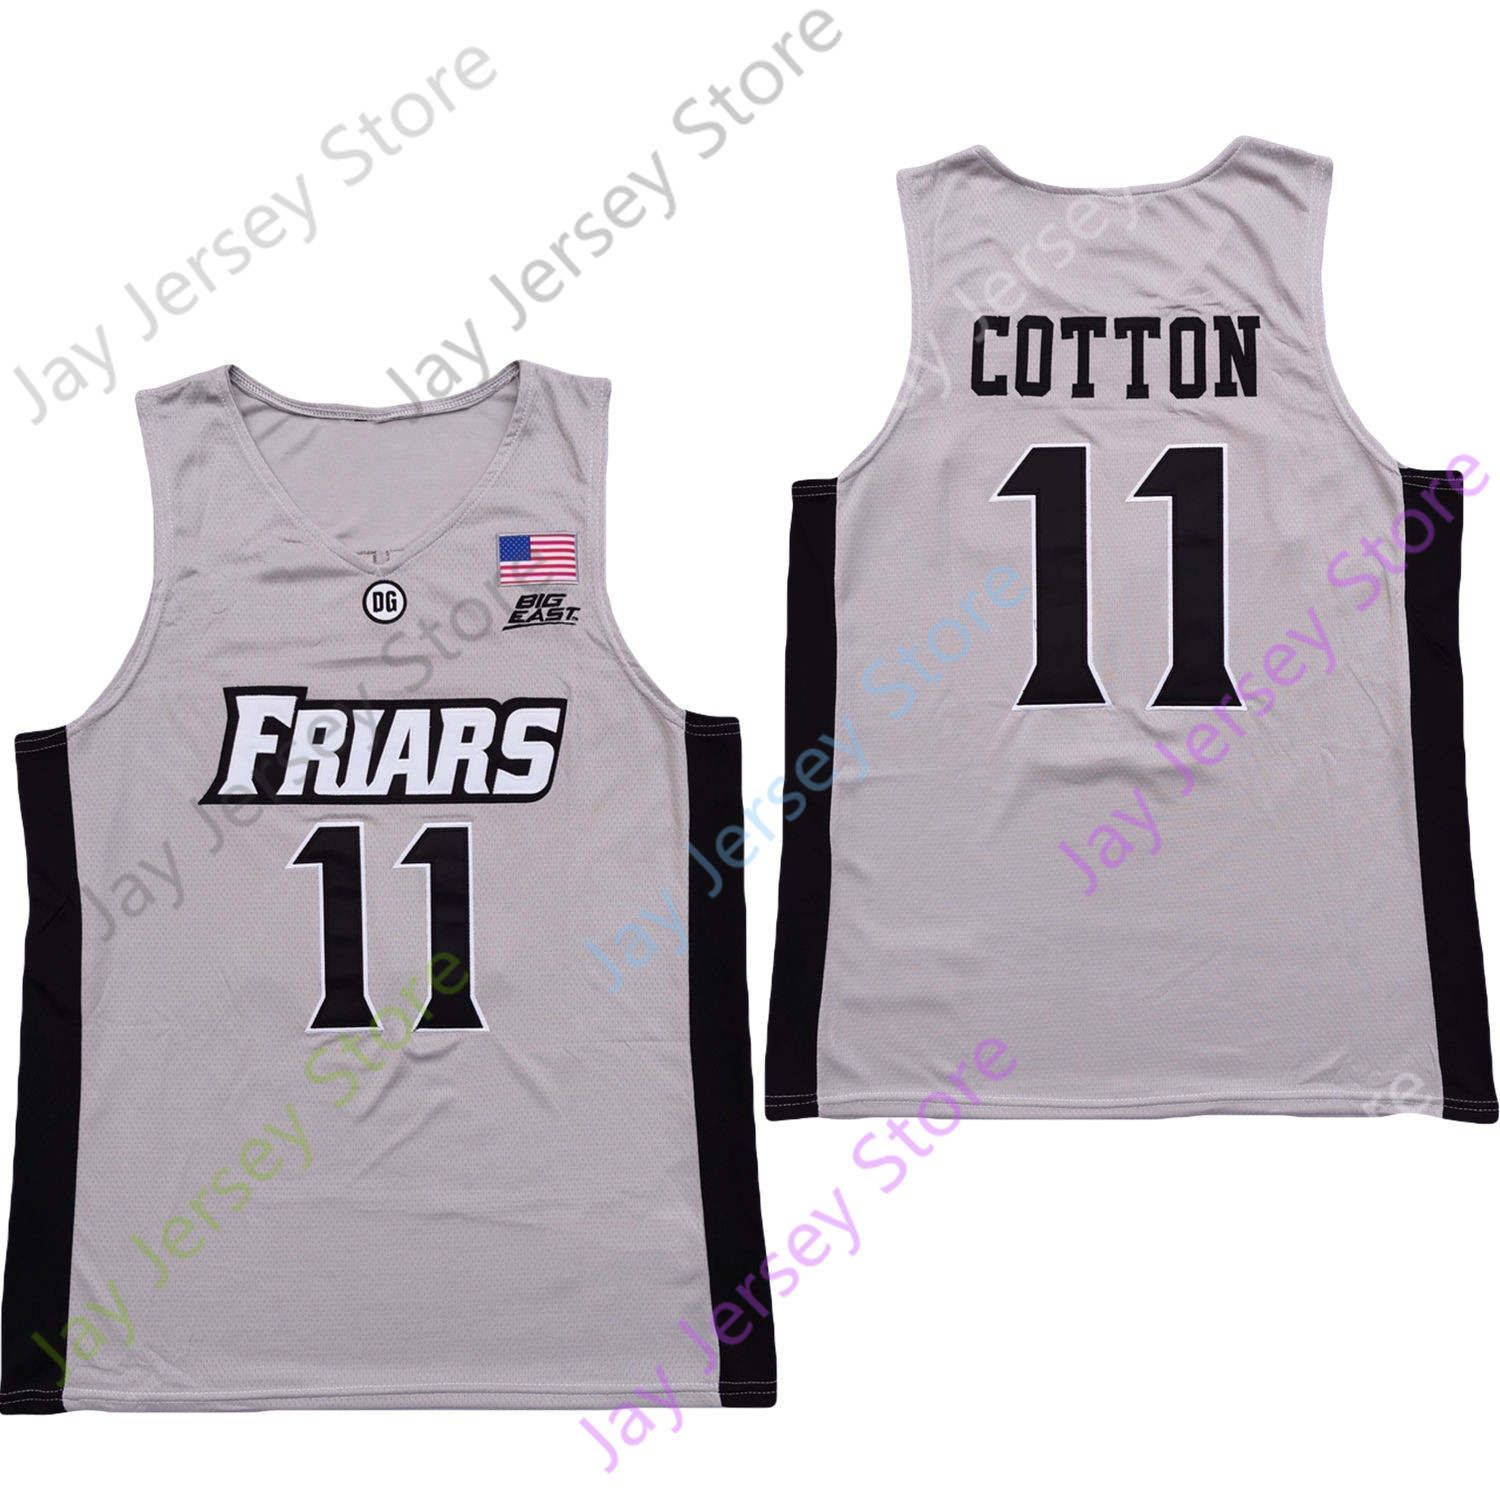 providence college basketball jersey